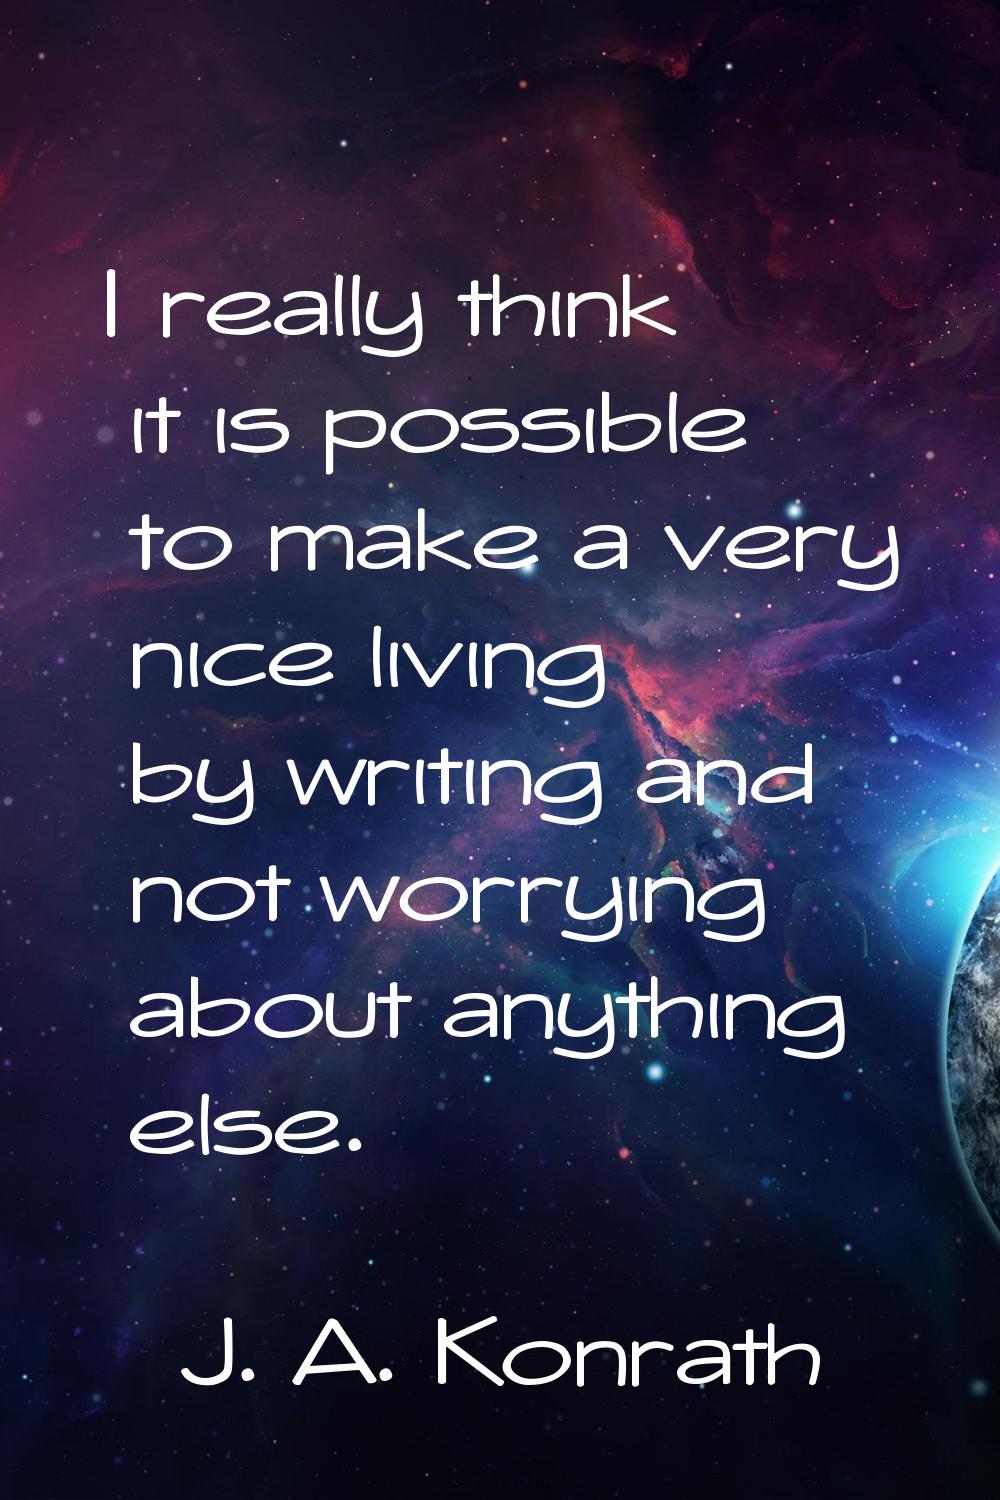 I really think it is possible to make a very nice living by writing and not worrying about anything